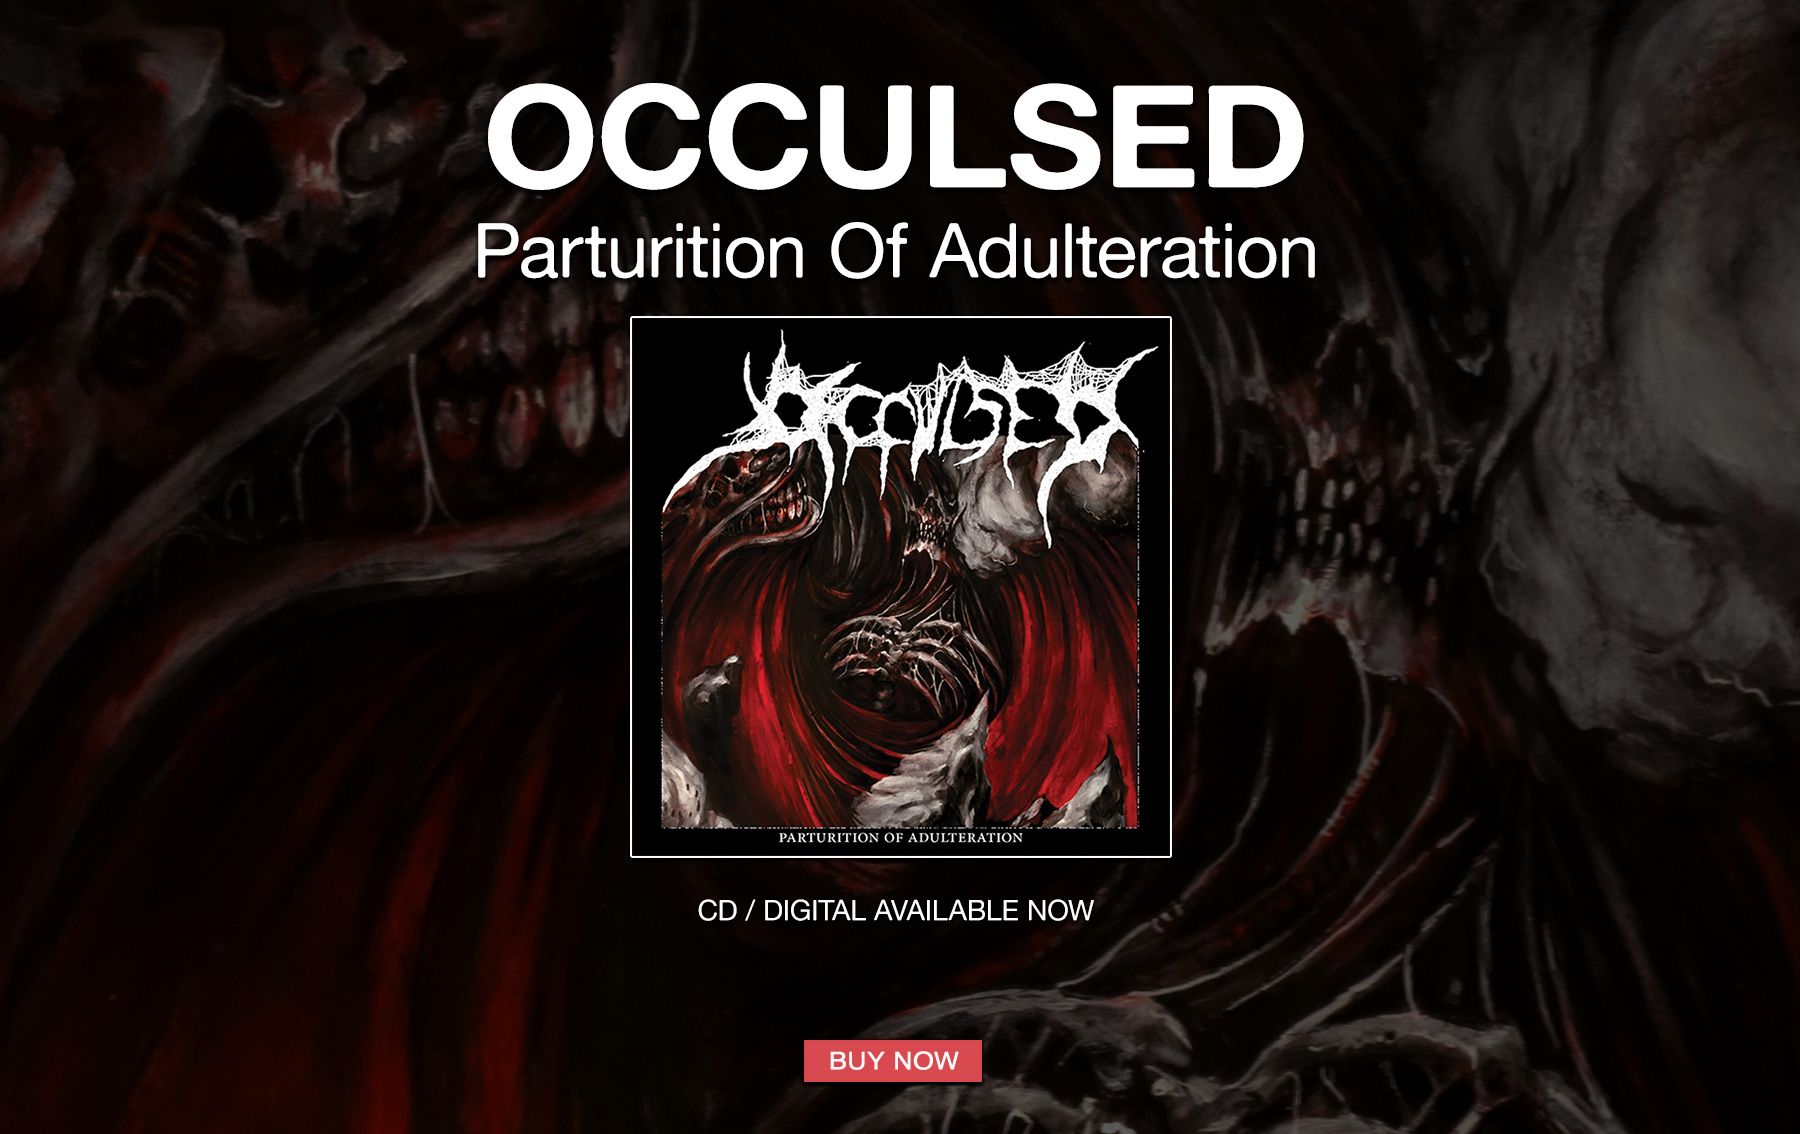 Occulsed 'Parturition Of Adulteration' available!